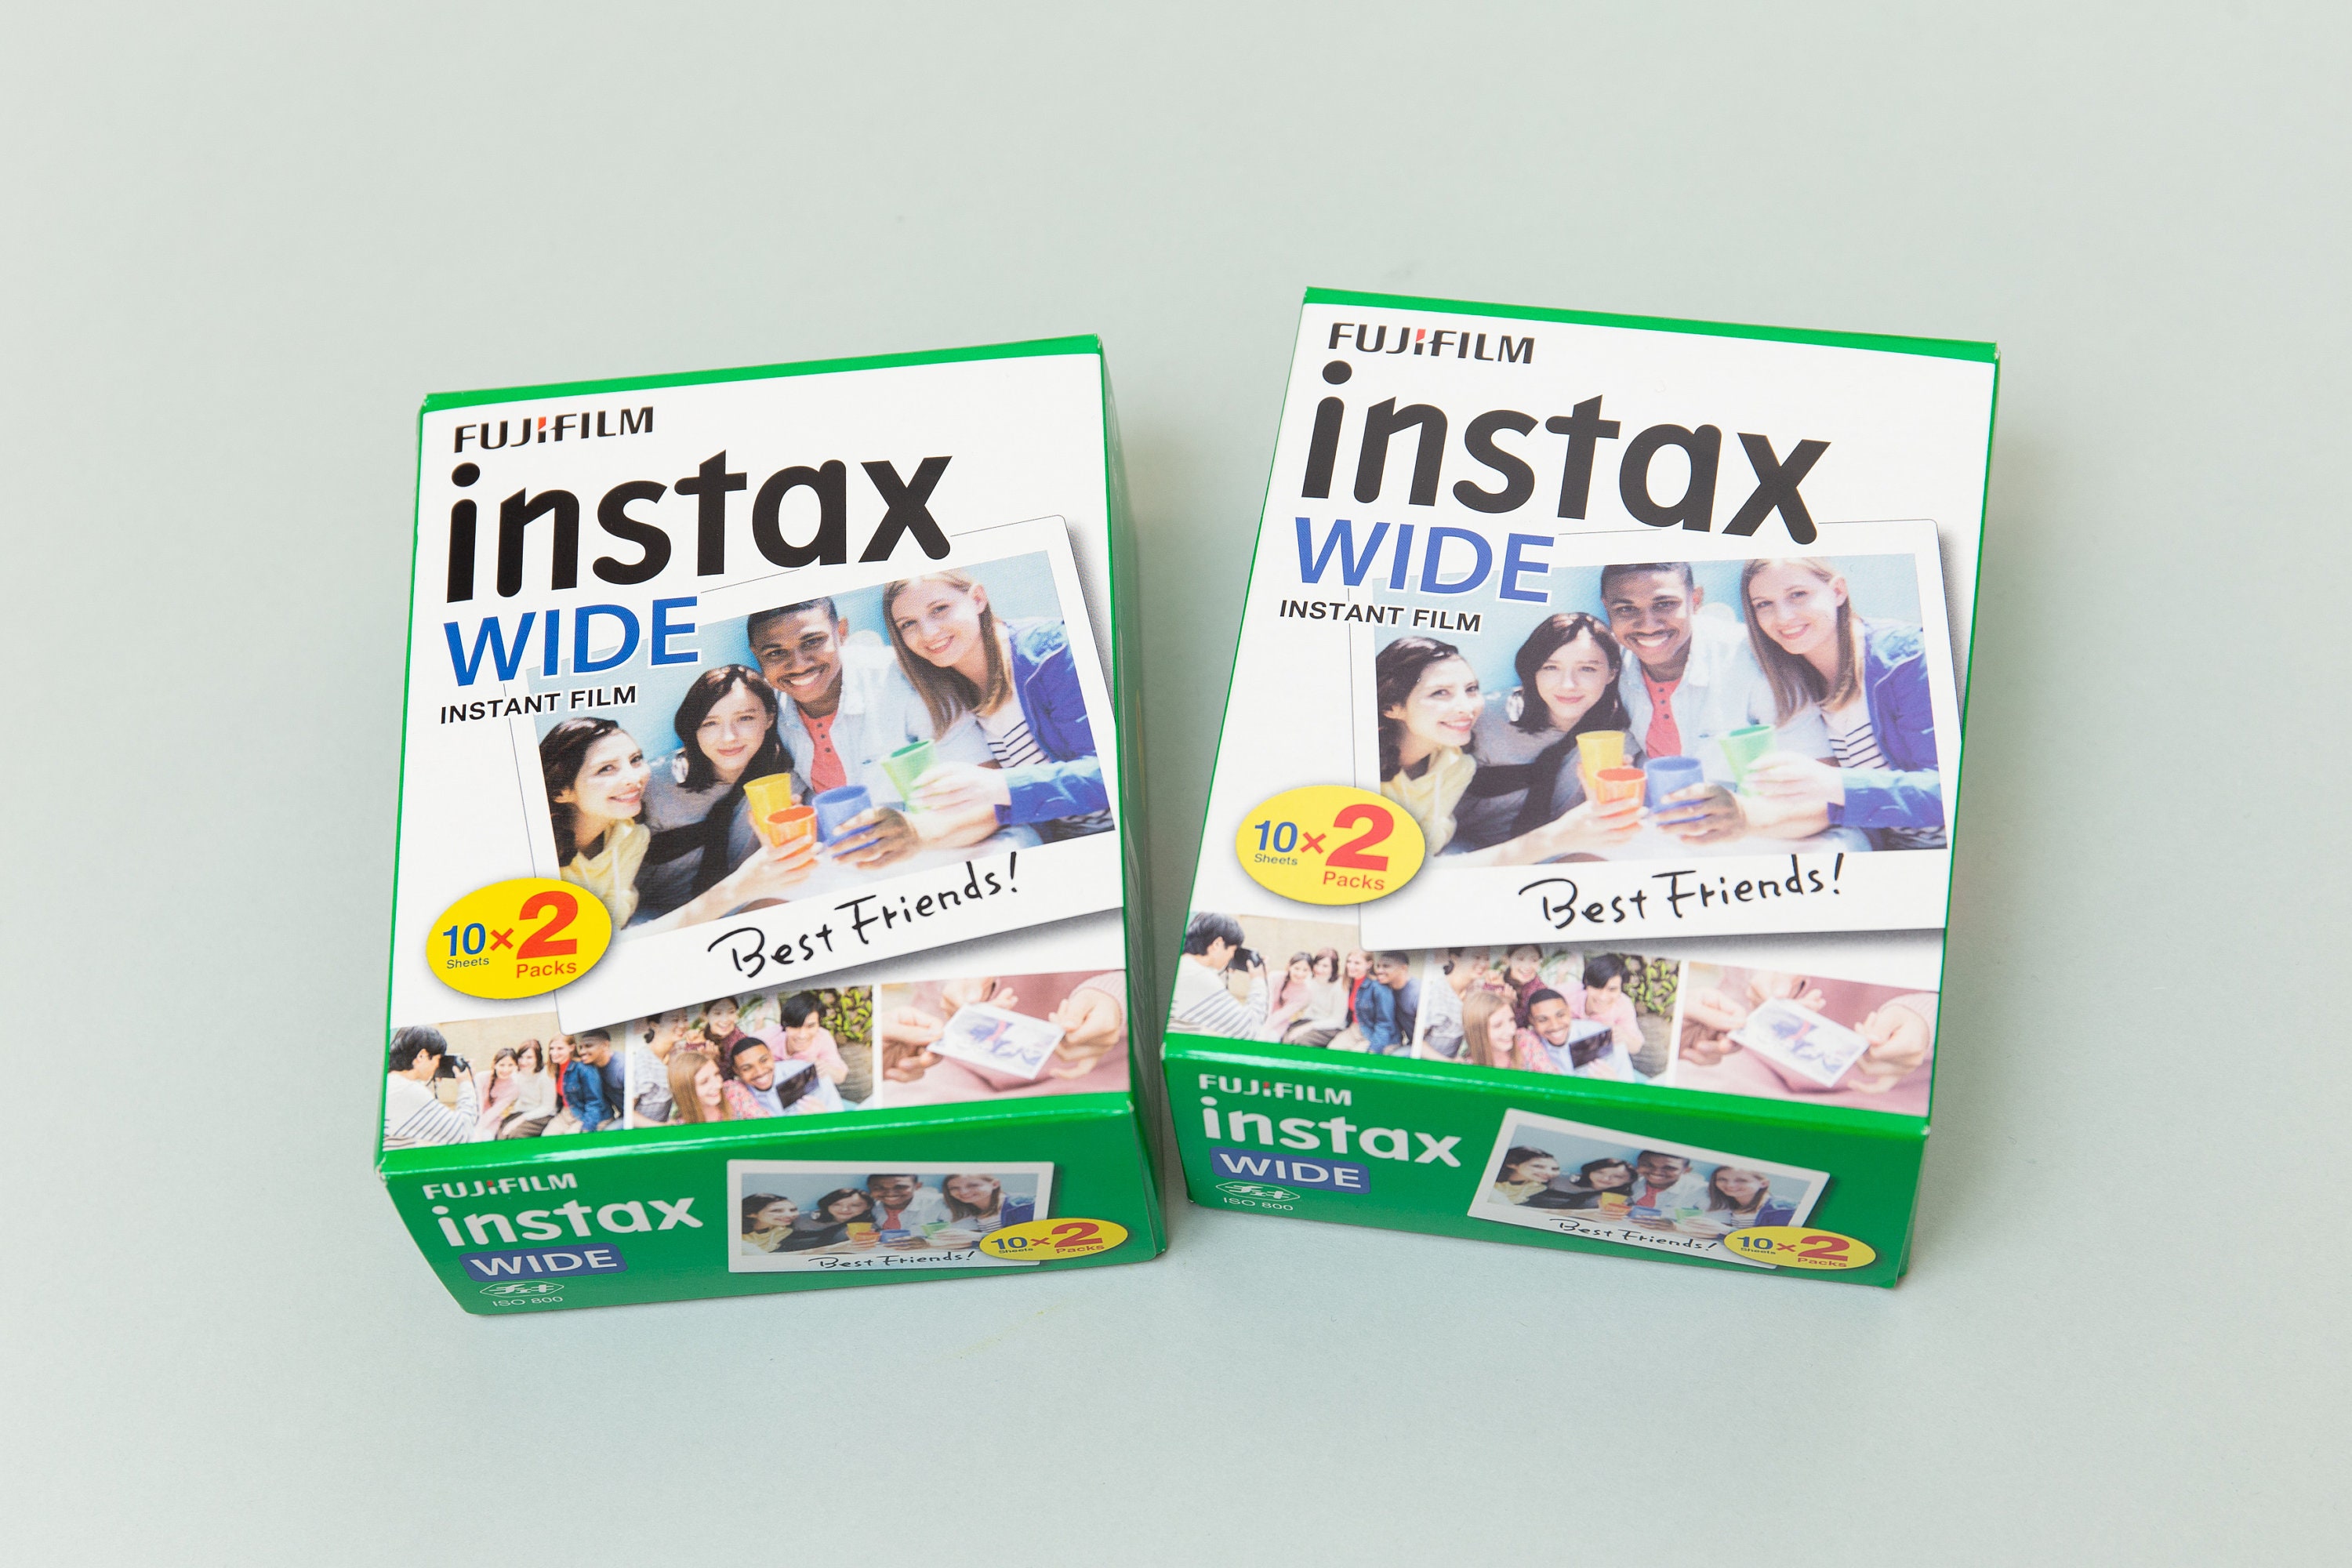 Instax Wide Film 40 Sheets. Fujifilm Instant Film. for - Etsy